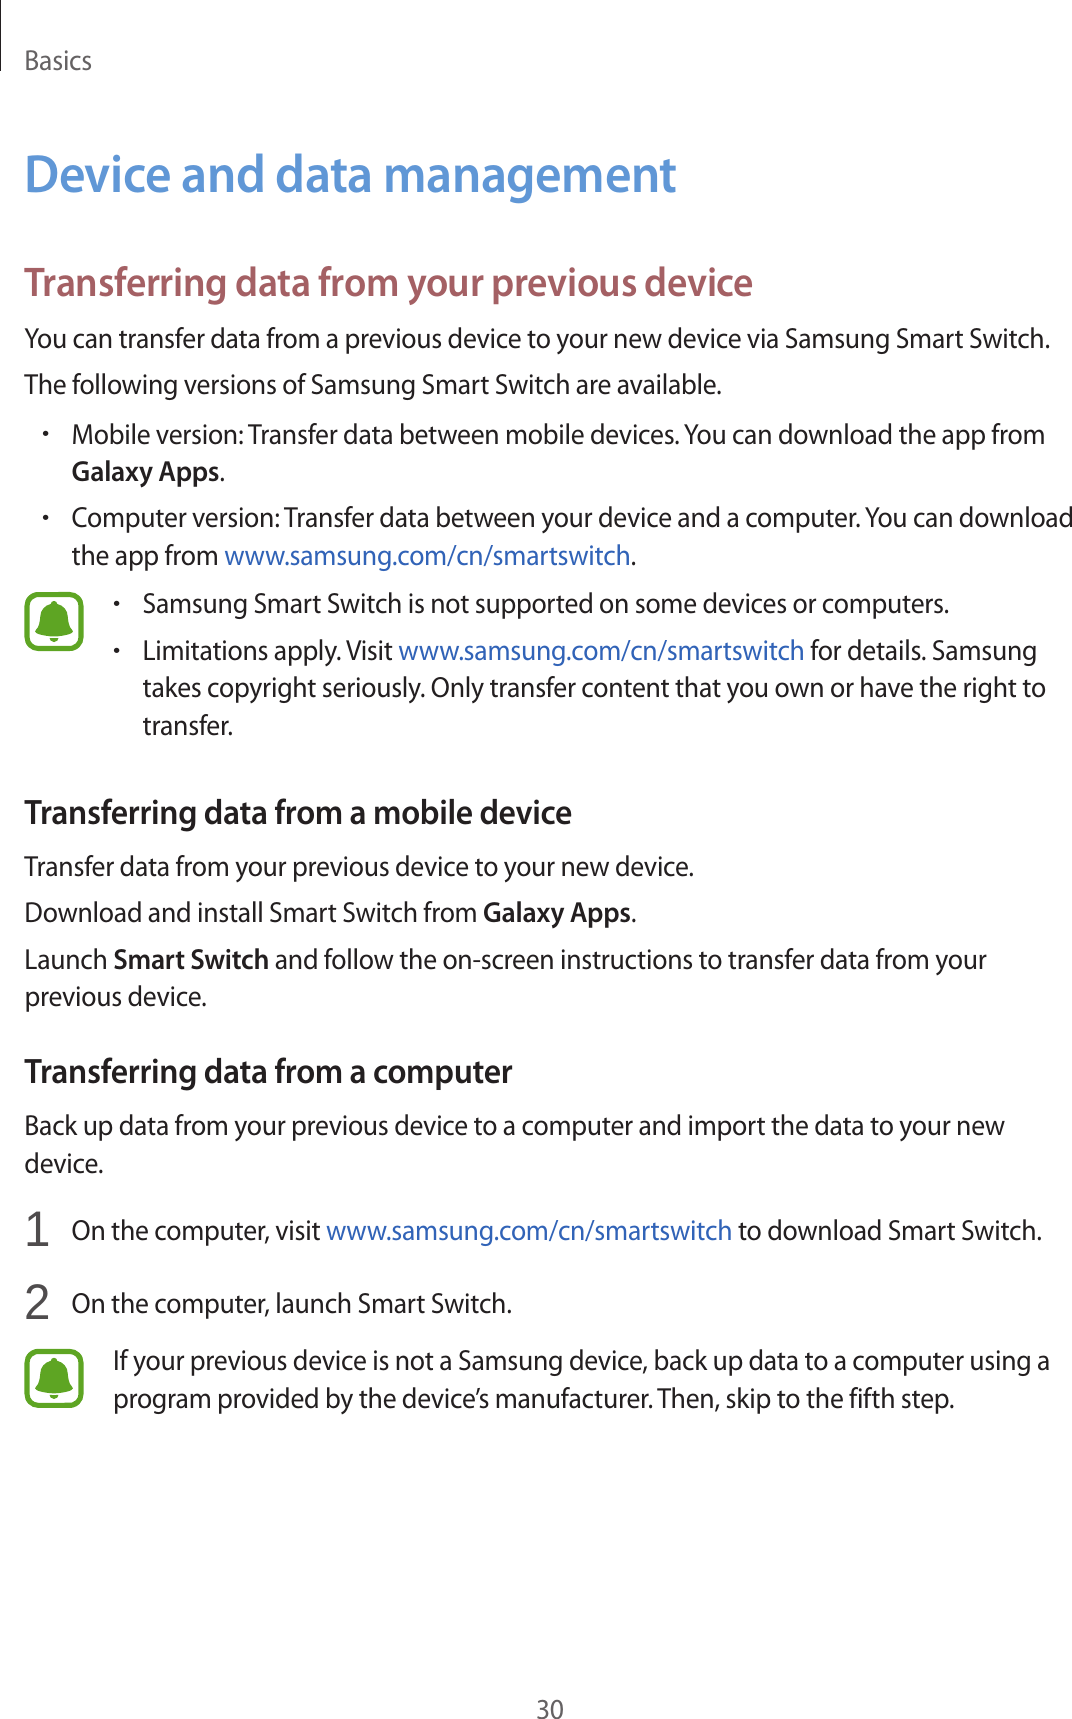 Basics30Device and data managementTransferring data from your previous deviceYou can transfer data from a previous device to your new device via Samsung Smart Switch.The following versions of Samsung Smart Switch are available.•Mobile version: Transfer data between mobile devices. You can download the app from Galaxy Apps.•Computer version: Transfer data between your device and a computer. You can download the app from www.samsung.com/cn/smartswitch.•Samsung Smart Switch is not supported on some devices or computers.•Limitations apply. Visit www.samsung.com/cn/smartswitch for details. Samsung takes copyright seriously. Only transfer content that you own or have the right to transfer.Transferring data from a mobile deviceTransfer data from your previous device to your new device.Download and install Smart Switch from Galaxy Apps.Launch Smart Switch and follow the on-screen instructions to transfer data from your previous device.Transferring data from a computerBack up data from your previous device to a computer and import the data to your new device.1  On the computer, visit www.samsung.com/cn/smartswitch to download Smart Switch.2  On the computer, launch Smart Switch.If your previous device is not a Samsung device, back up data to a computer using a program provided by the device’s manufacturer. Then, skip to the fifth step.